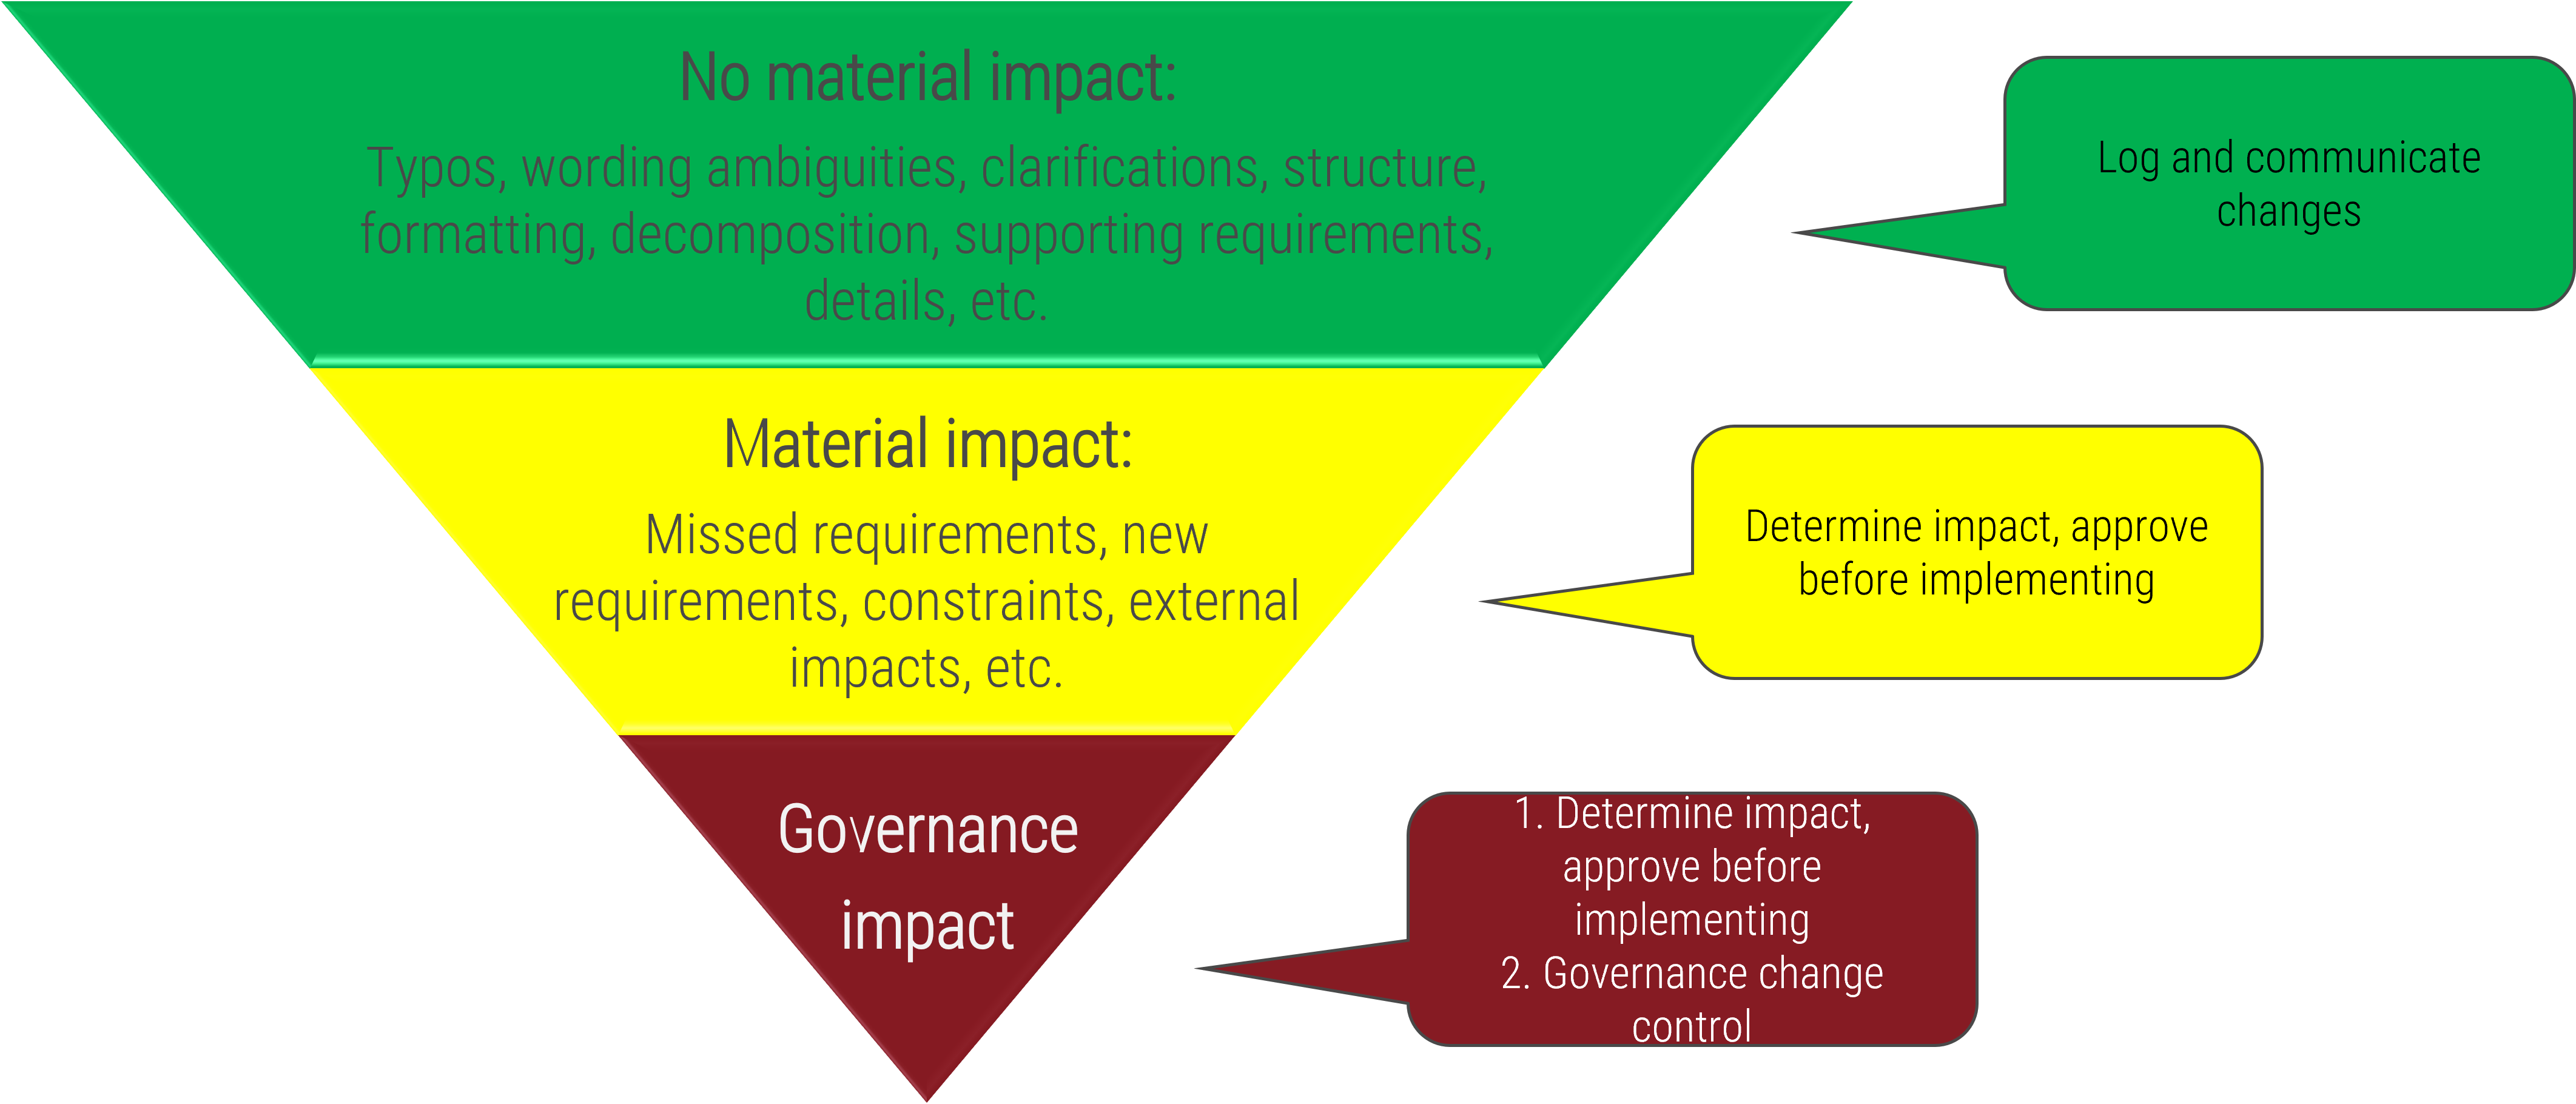 An image of an inverted triangle, with the top being labeled: No Material Impact, the middle being labeled: Material impact; and the bottom being labeled: Governance Impact.  To the right of the image, are text boxes elaborating on each heading.